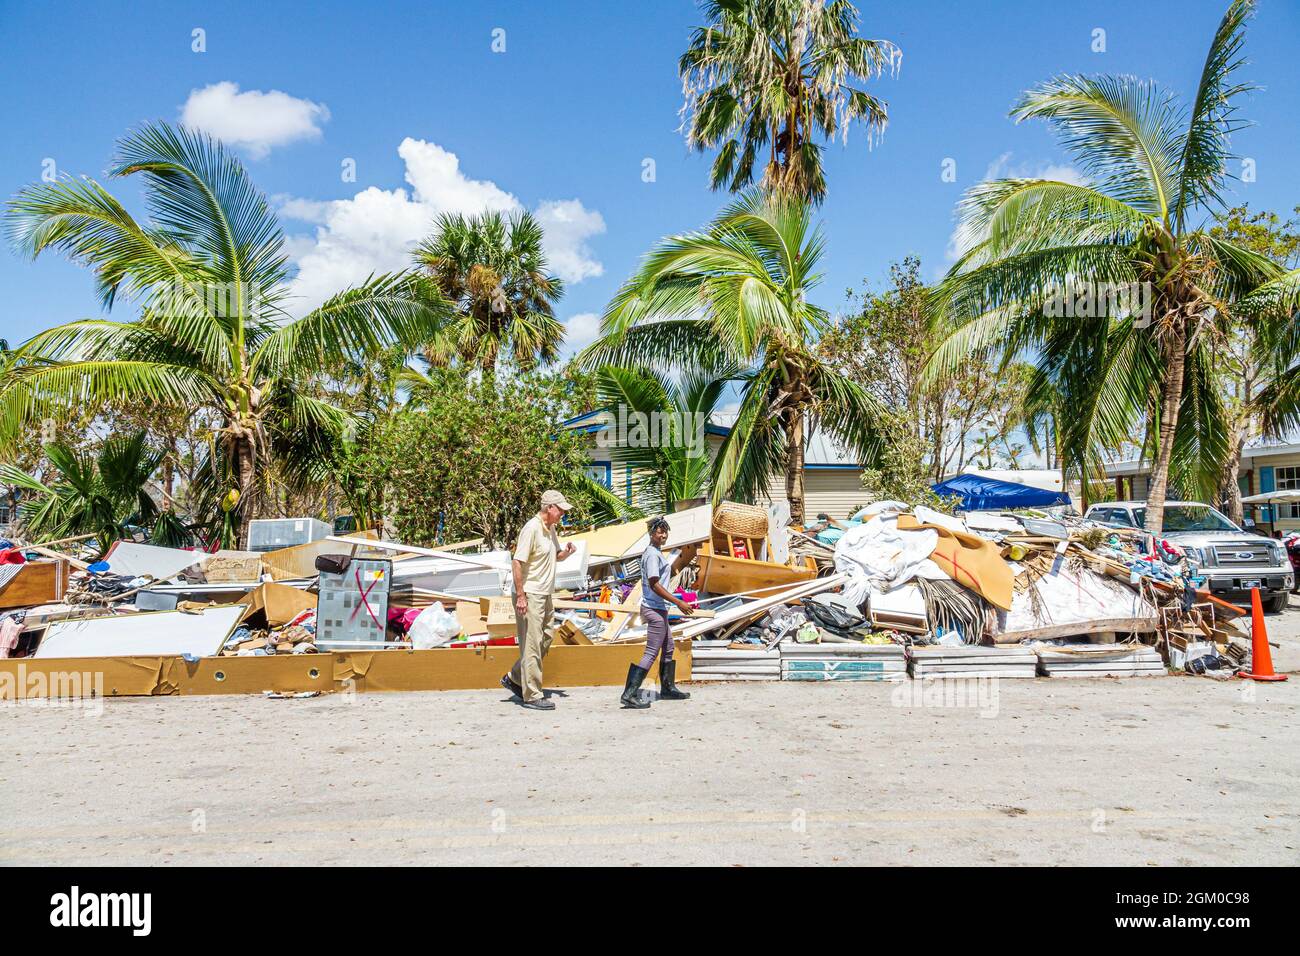 Everglades City Florida,after Hurricane Irma,houses homes storm disaster recovery cleanup,surge flood damage destruction aftermath trash debris Stock Photo